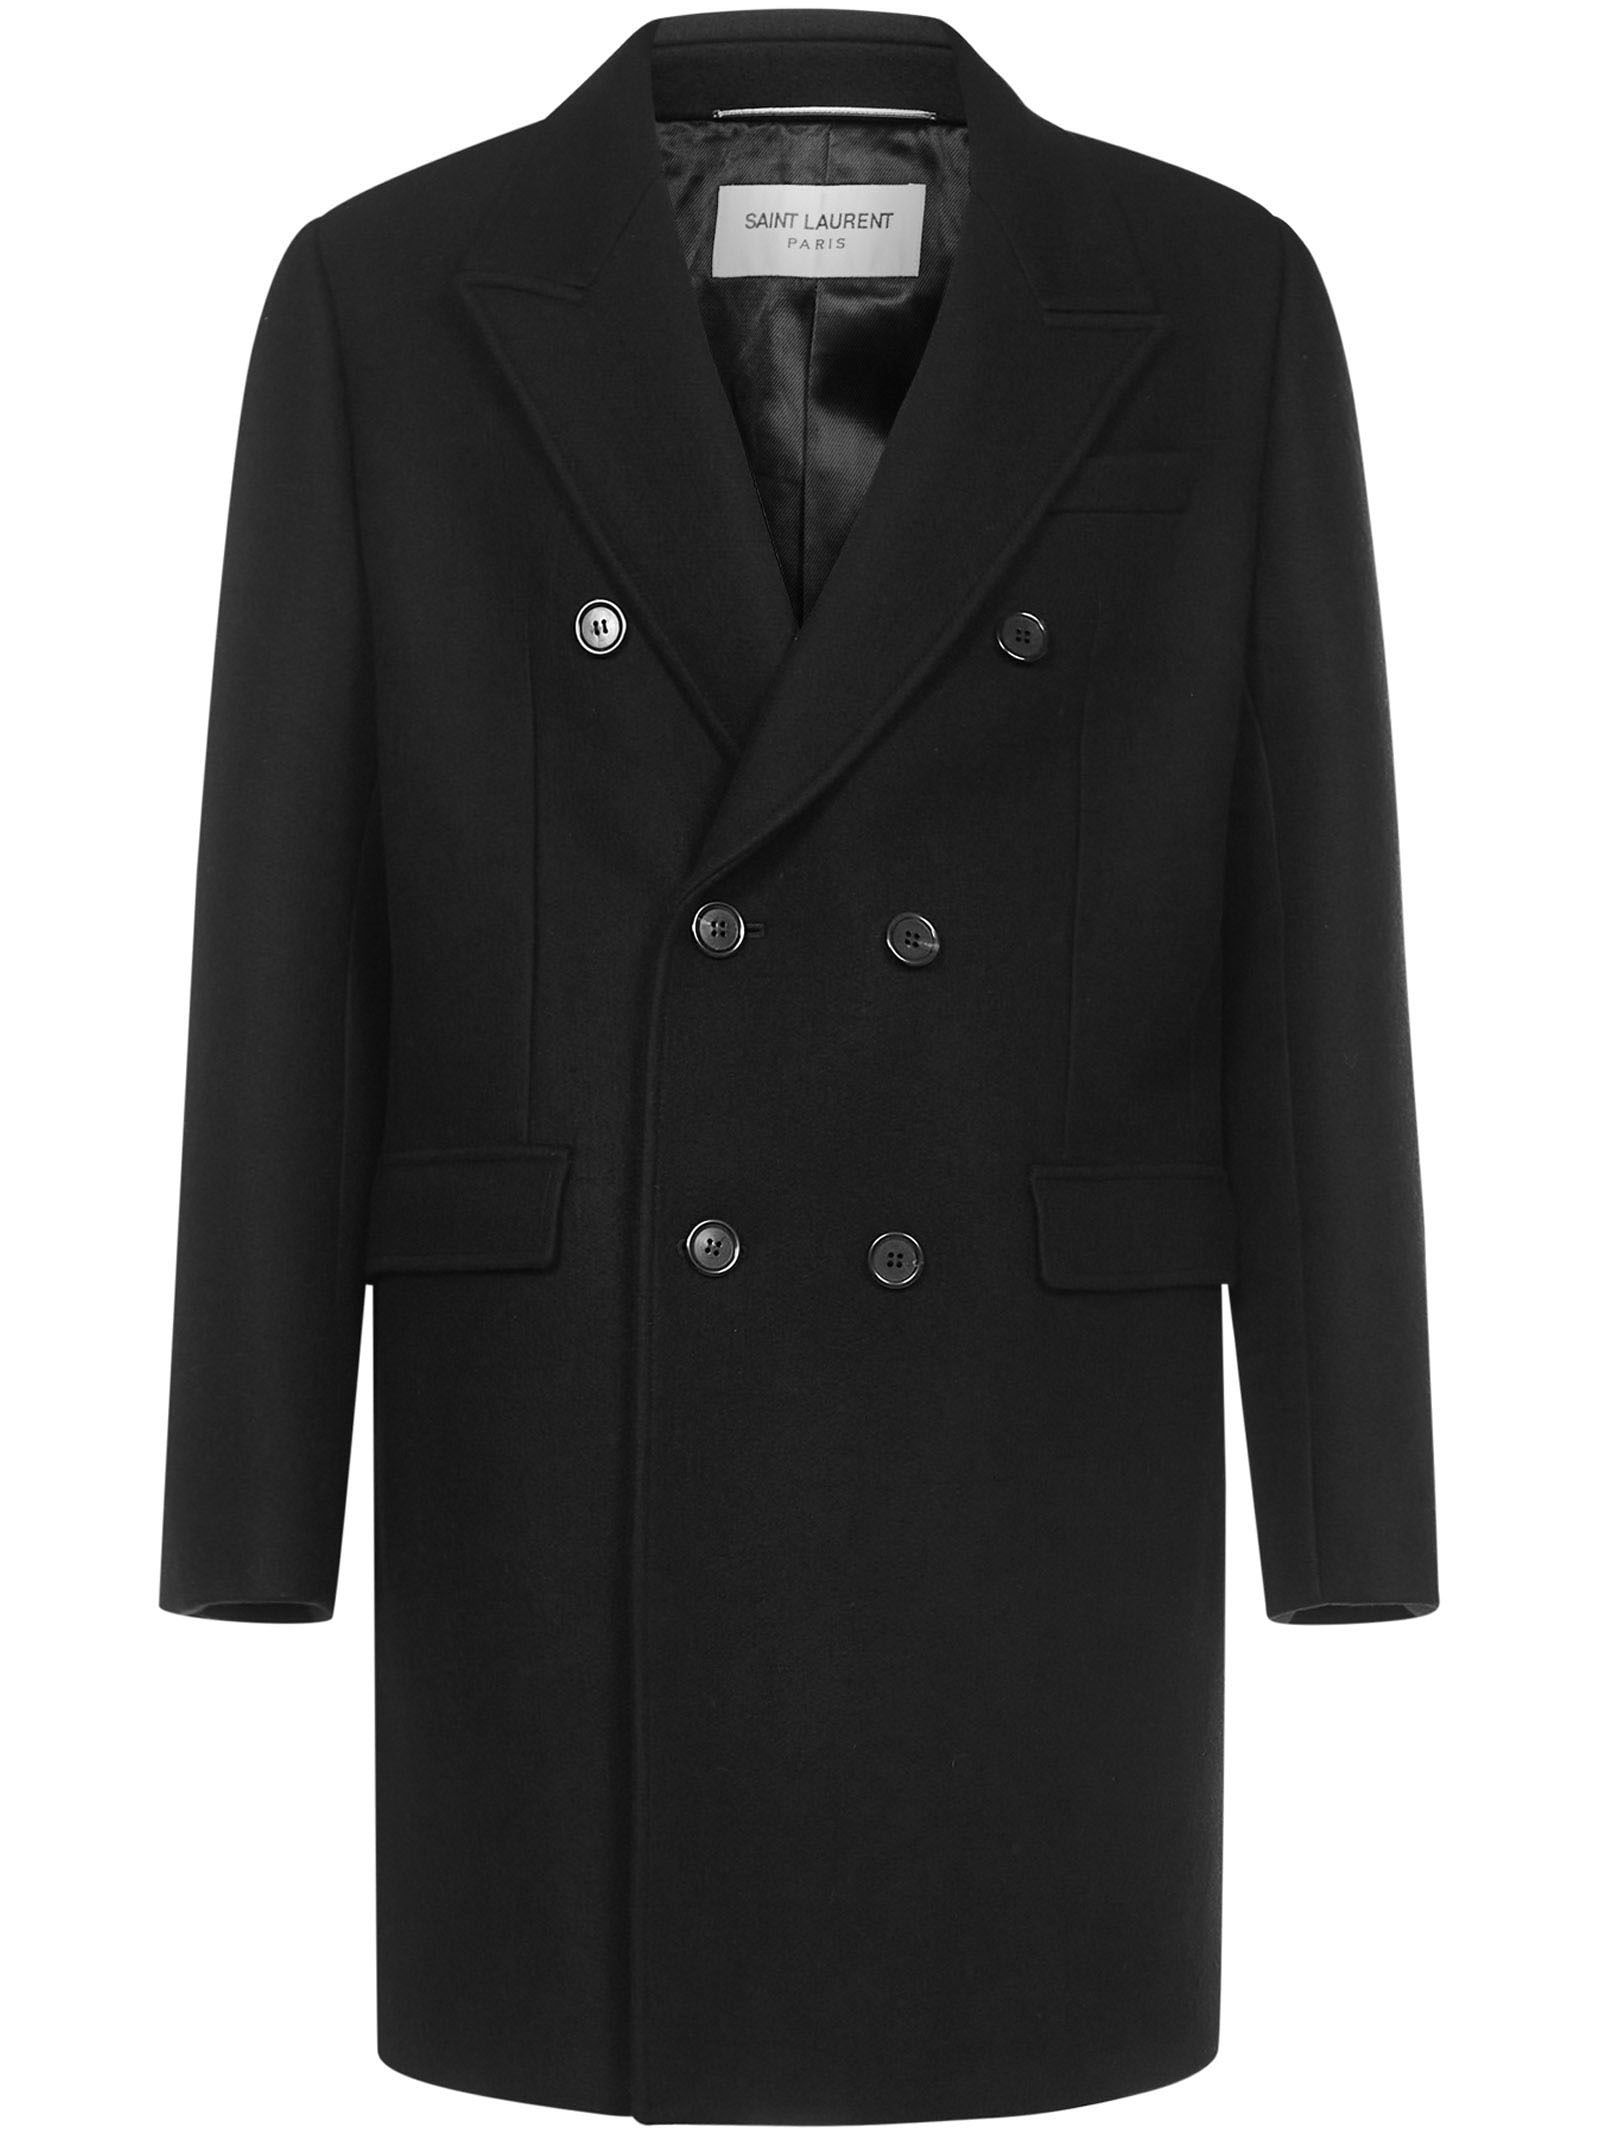 CHESTERFIELD double-breasted coat in black cashmere with peak lapel and back vent. - 1